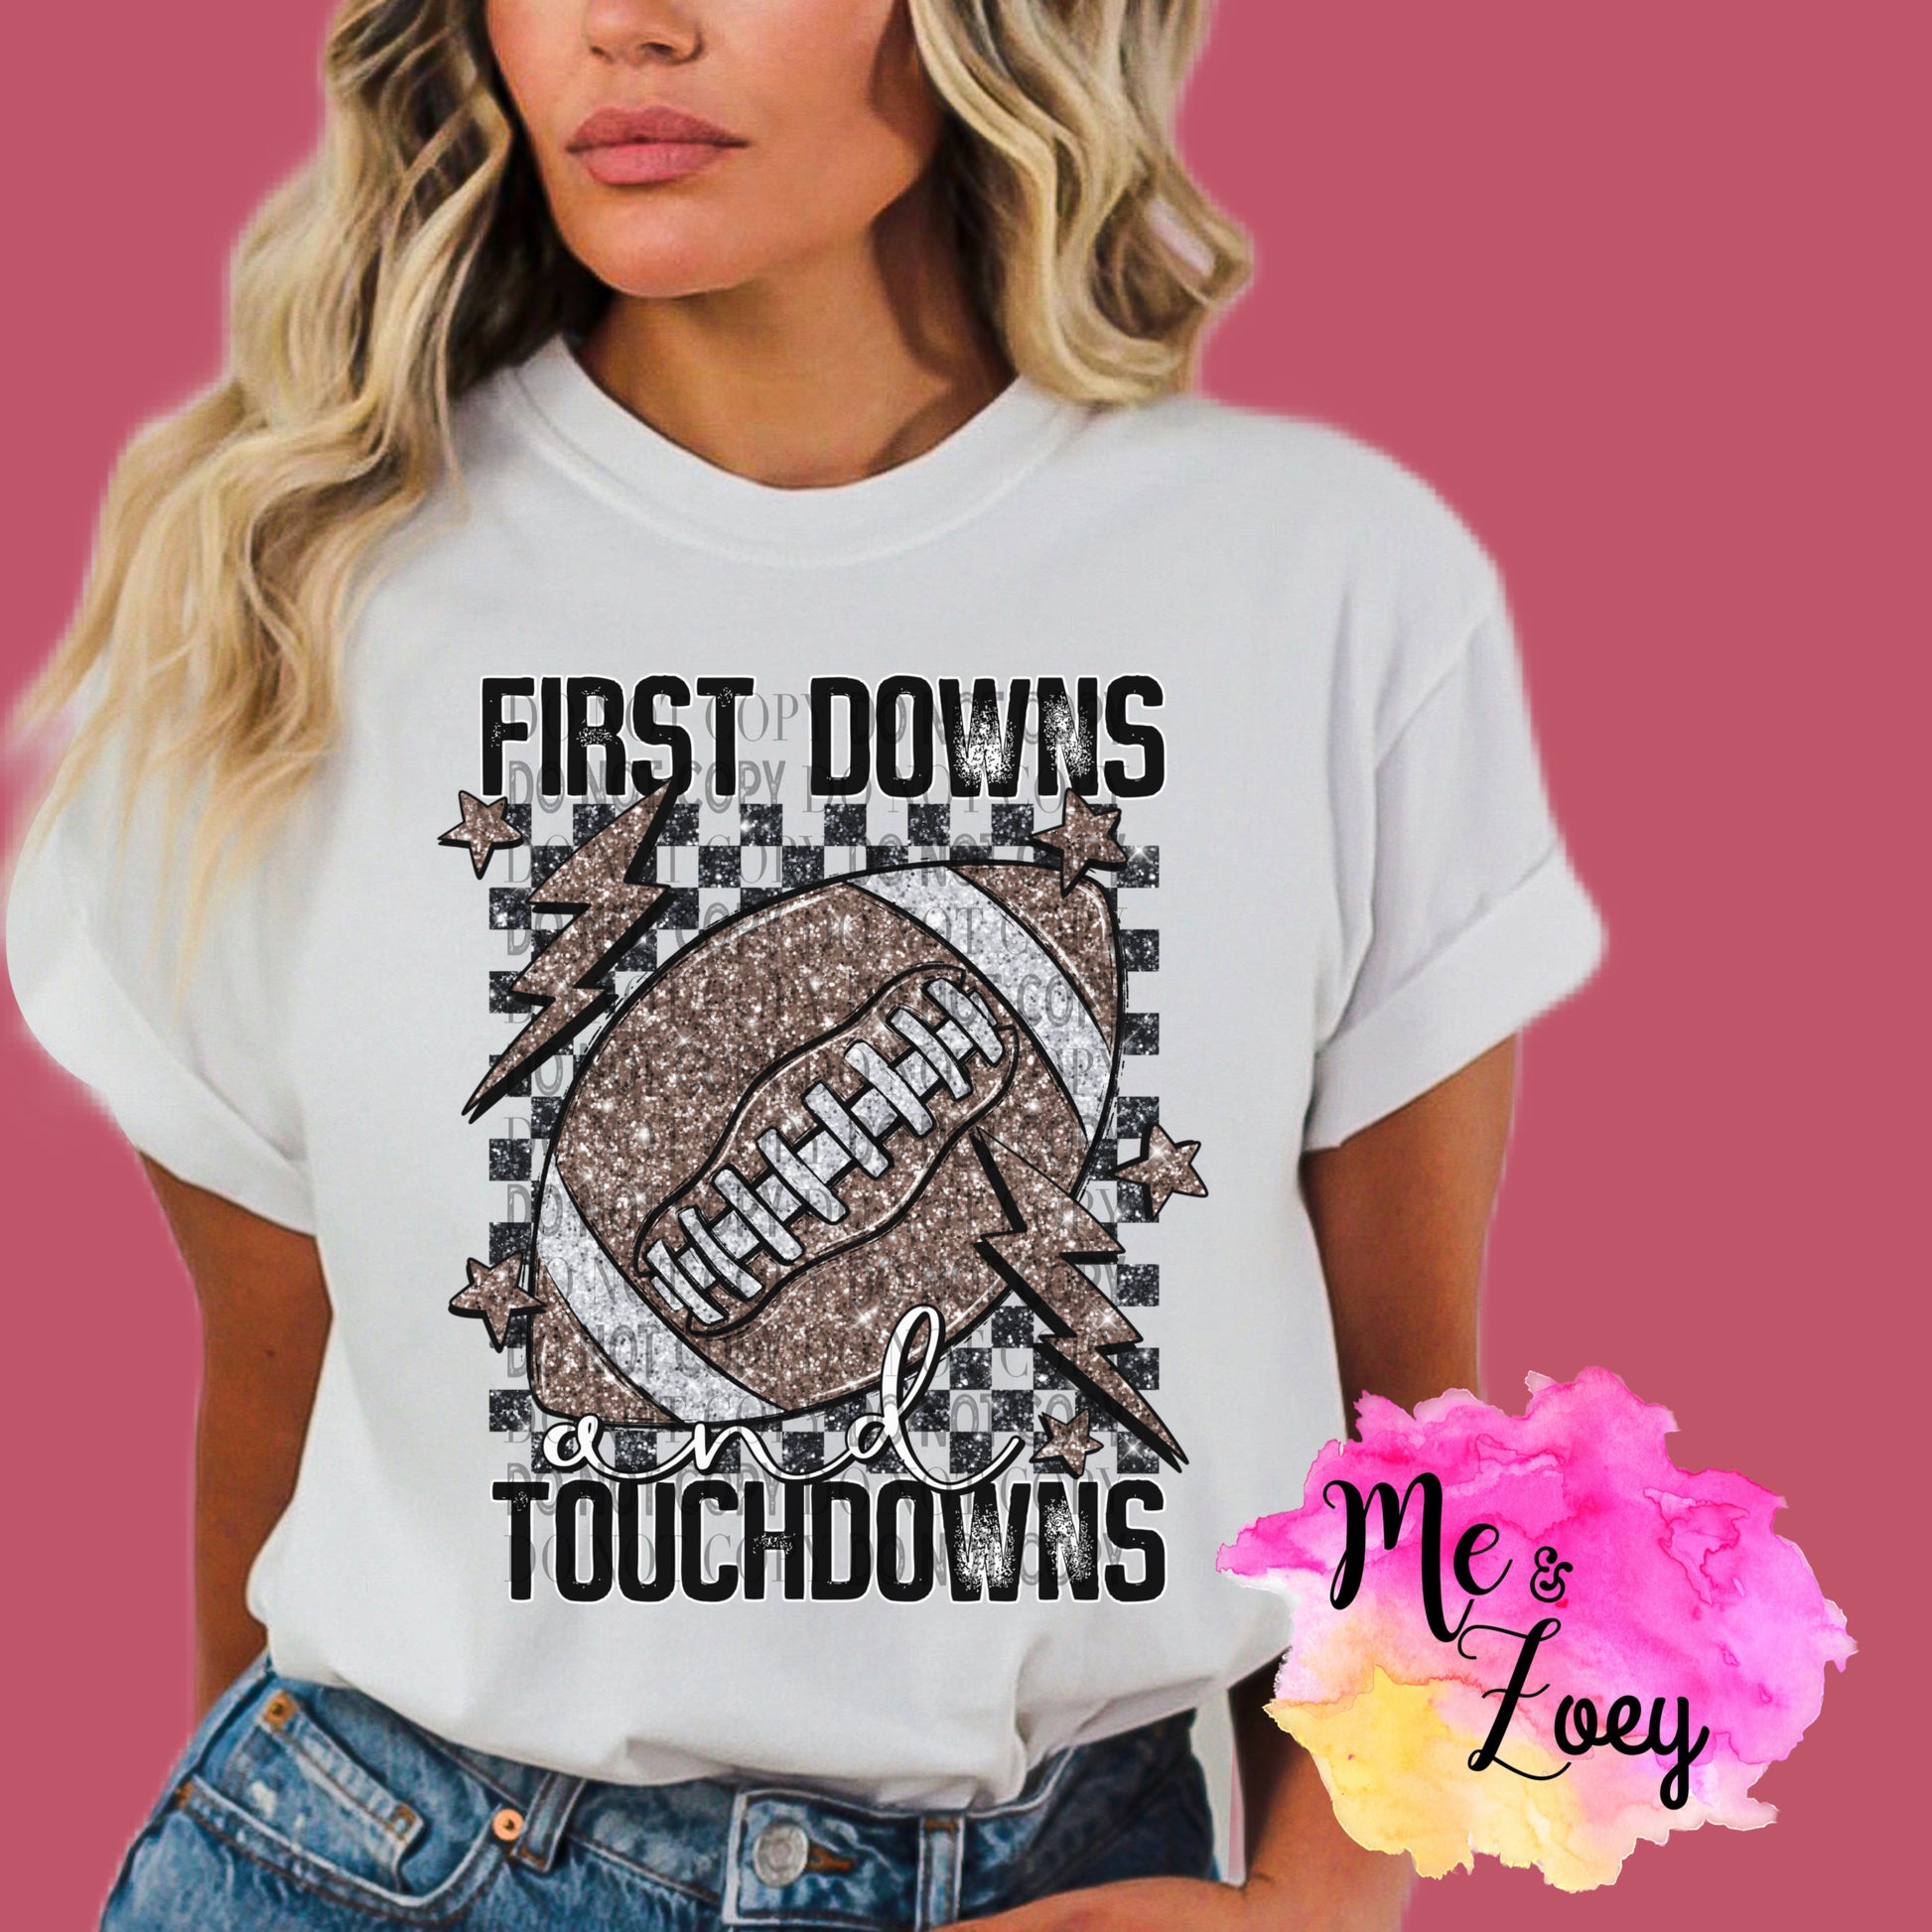 First Down And Touch Downs Graphic Tee - MeAndZoey